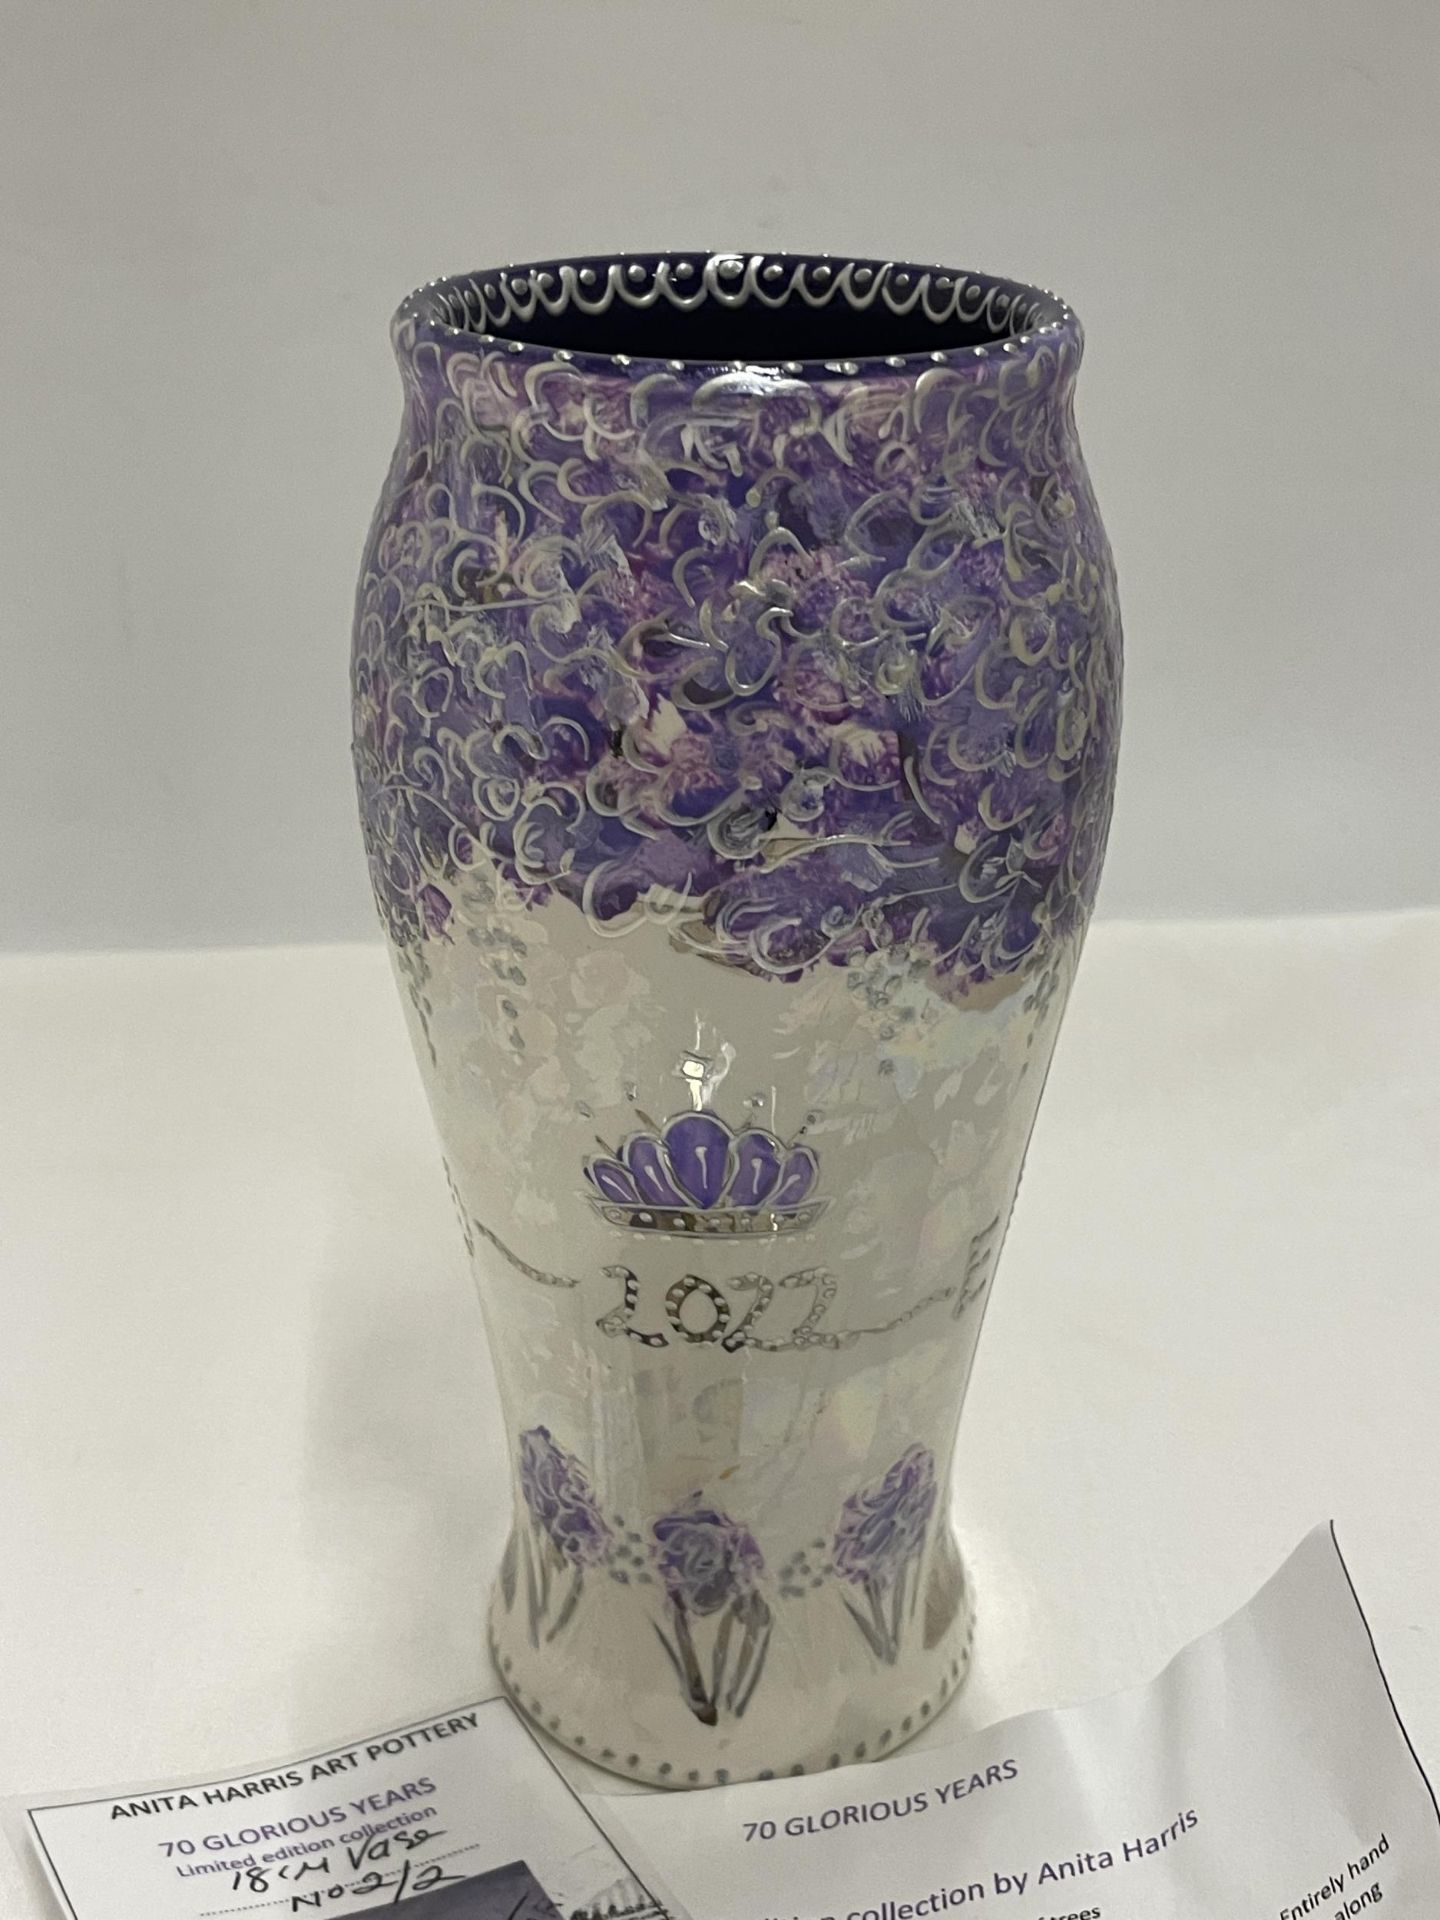 A LIMITED EDITION ANITA HARRIS HAND PAINTED AND SIGNED 70 GLORIOUS YEARS VASE WITH PRESENTATION - Image 2 of 3